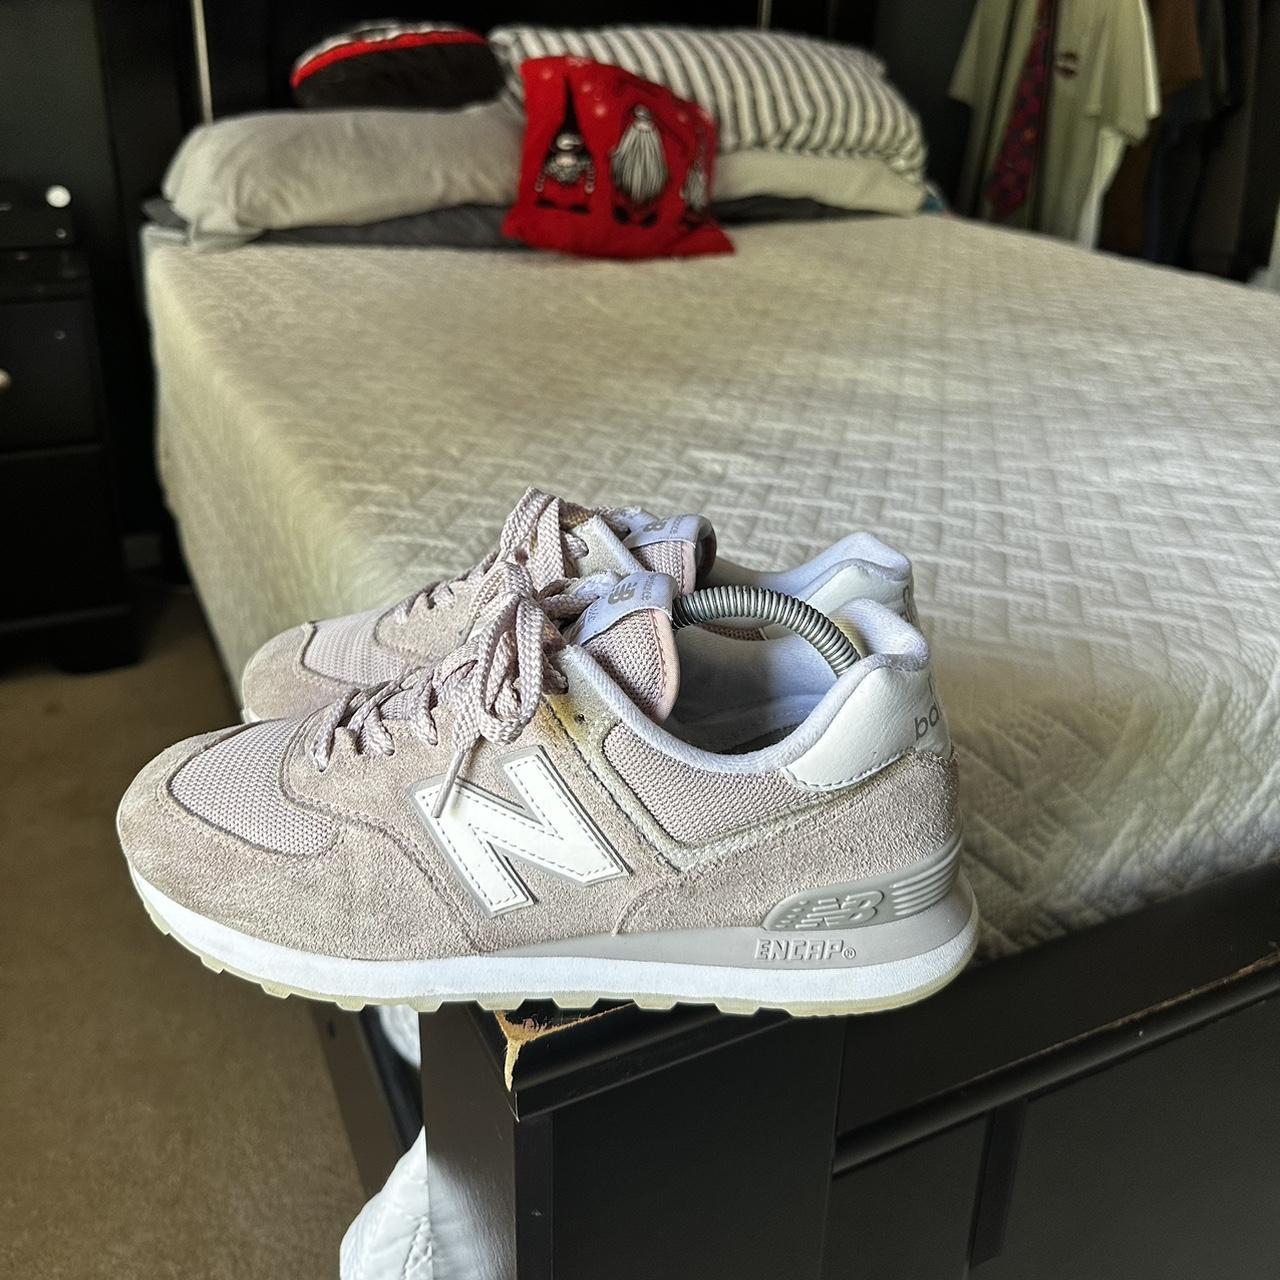 New Balance Women's Pink and White Trainers